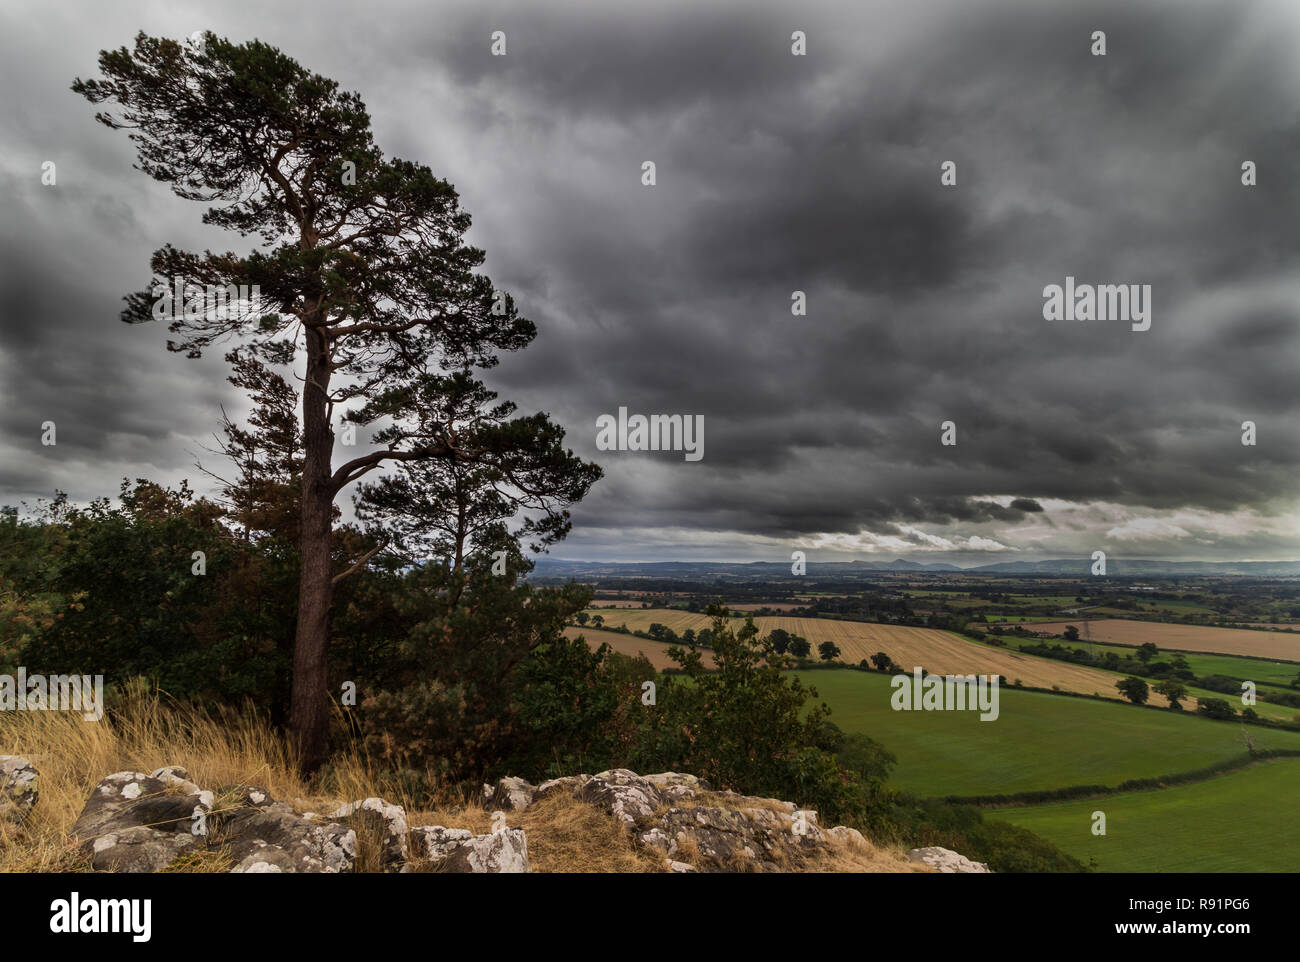 A moody sky from the vista of a hill Stock Photo